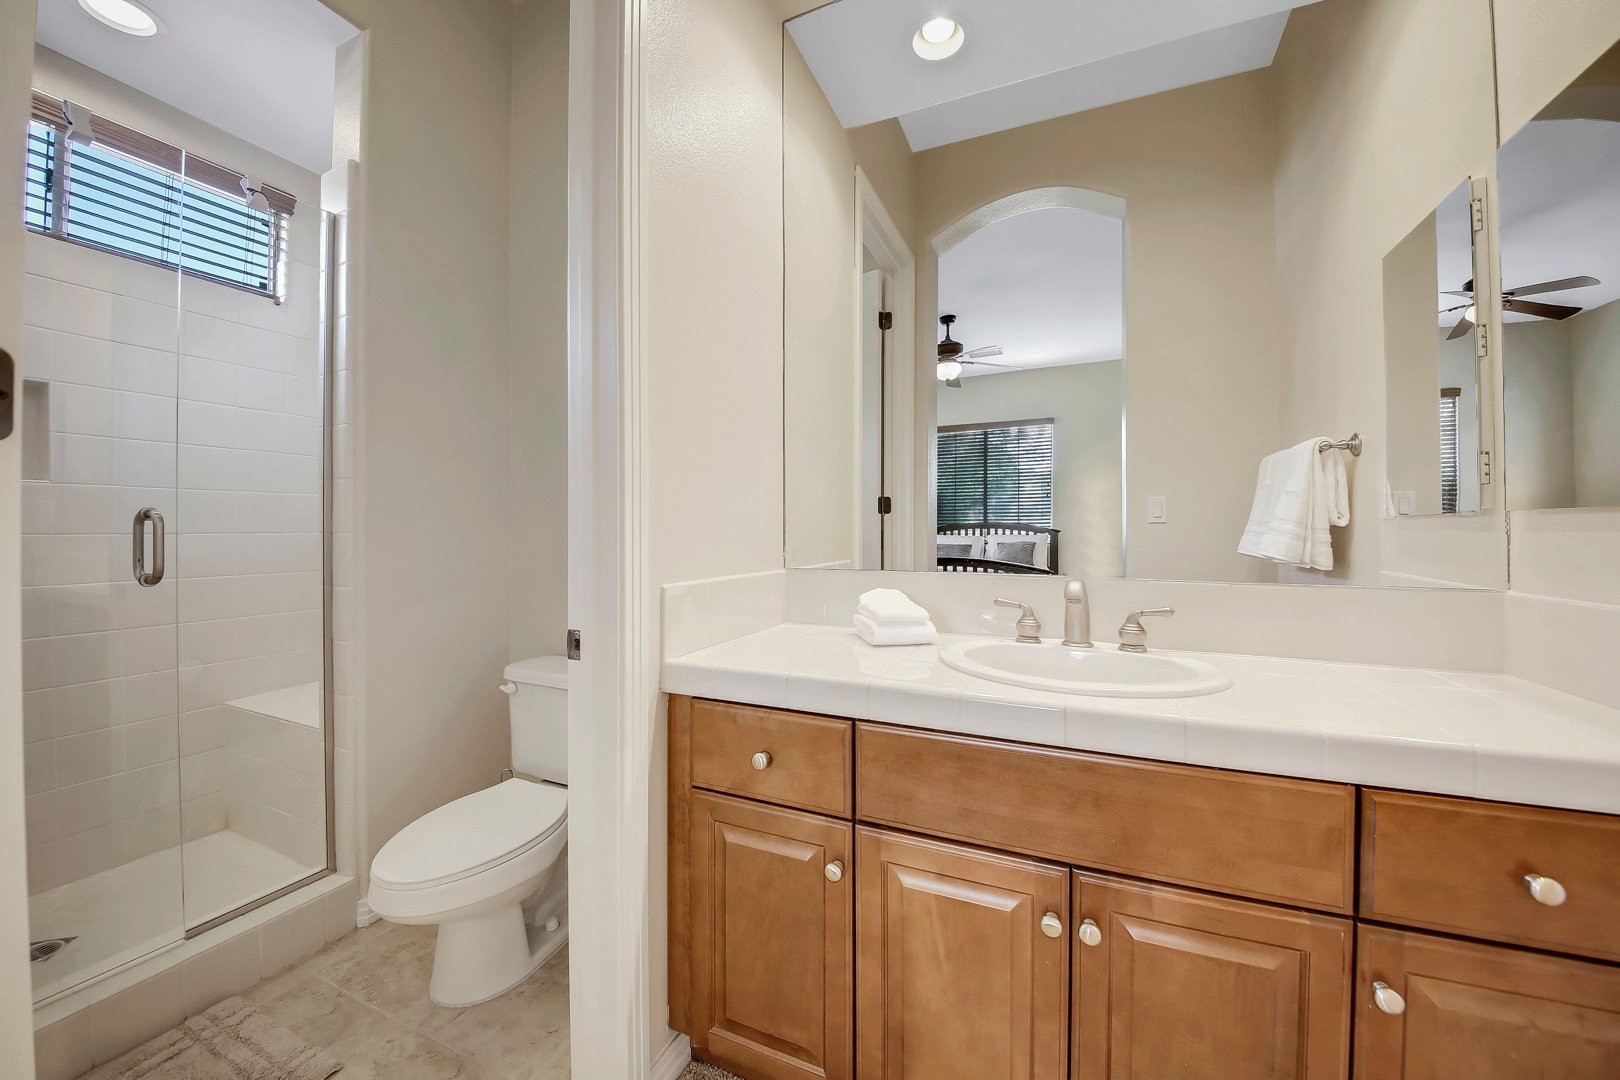 Suite 2 features a private, en suite bathroom with a tile shower and sink.